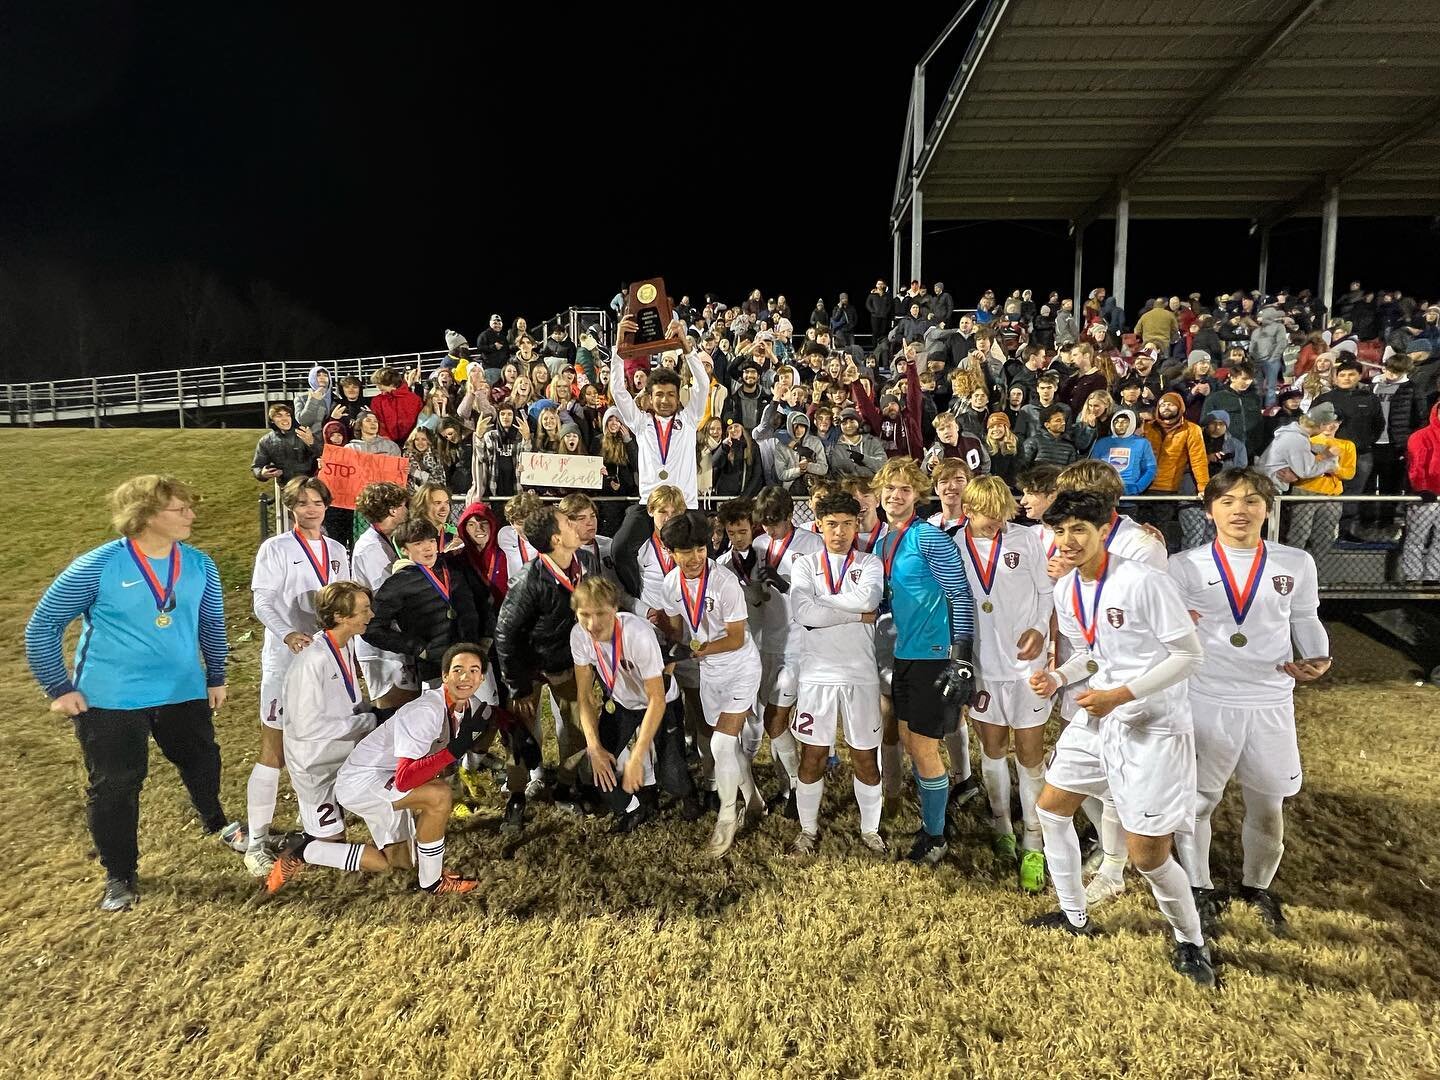 It took 110 minutes and a penalty kick shootout, but the NCHSAA 2A State Champion Owen Warhorses came back to the Swannanoa Valley with the first soccer title in school history. Find out more about their win over the Clinton Dark Horses and see photo